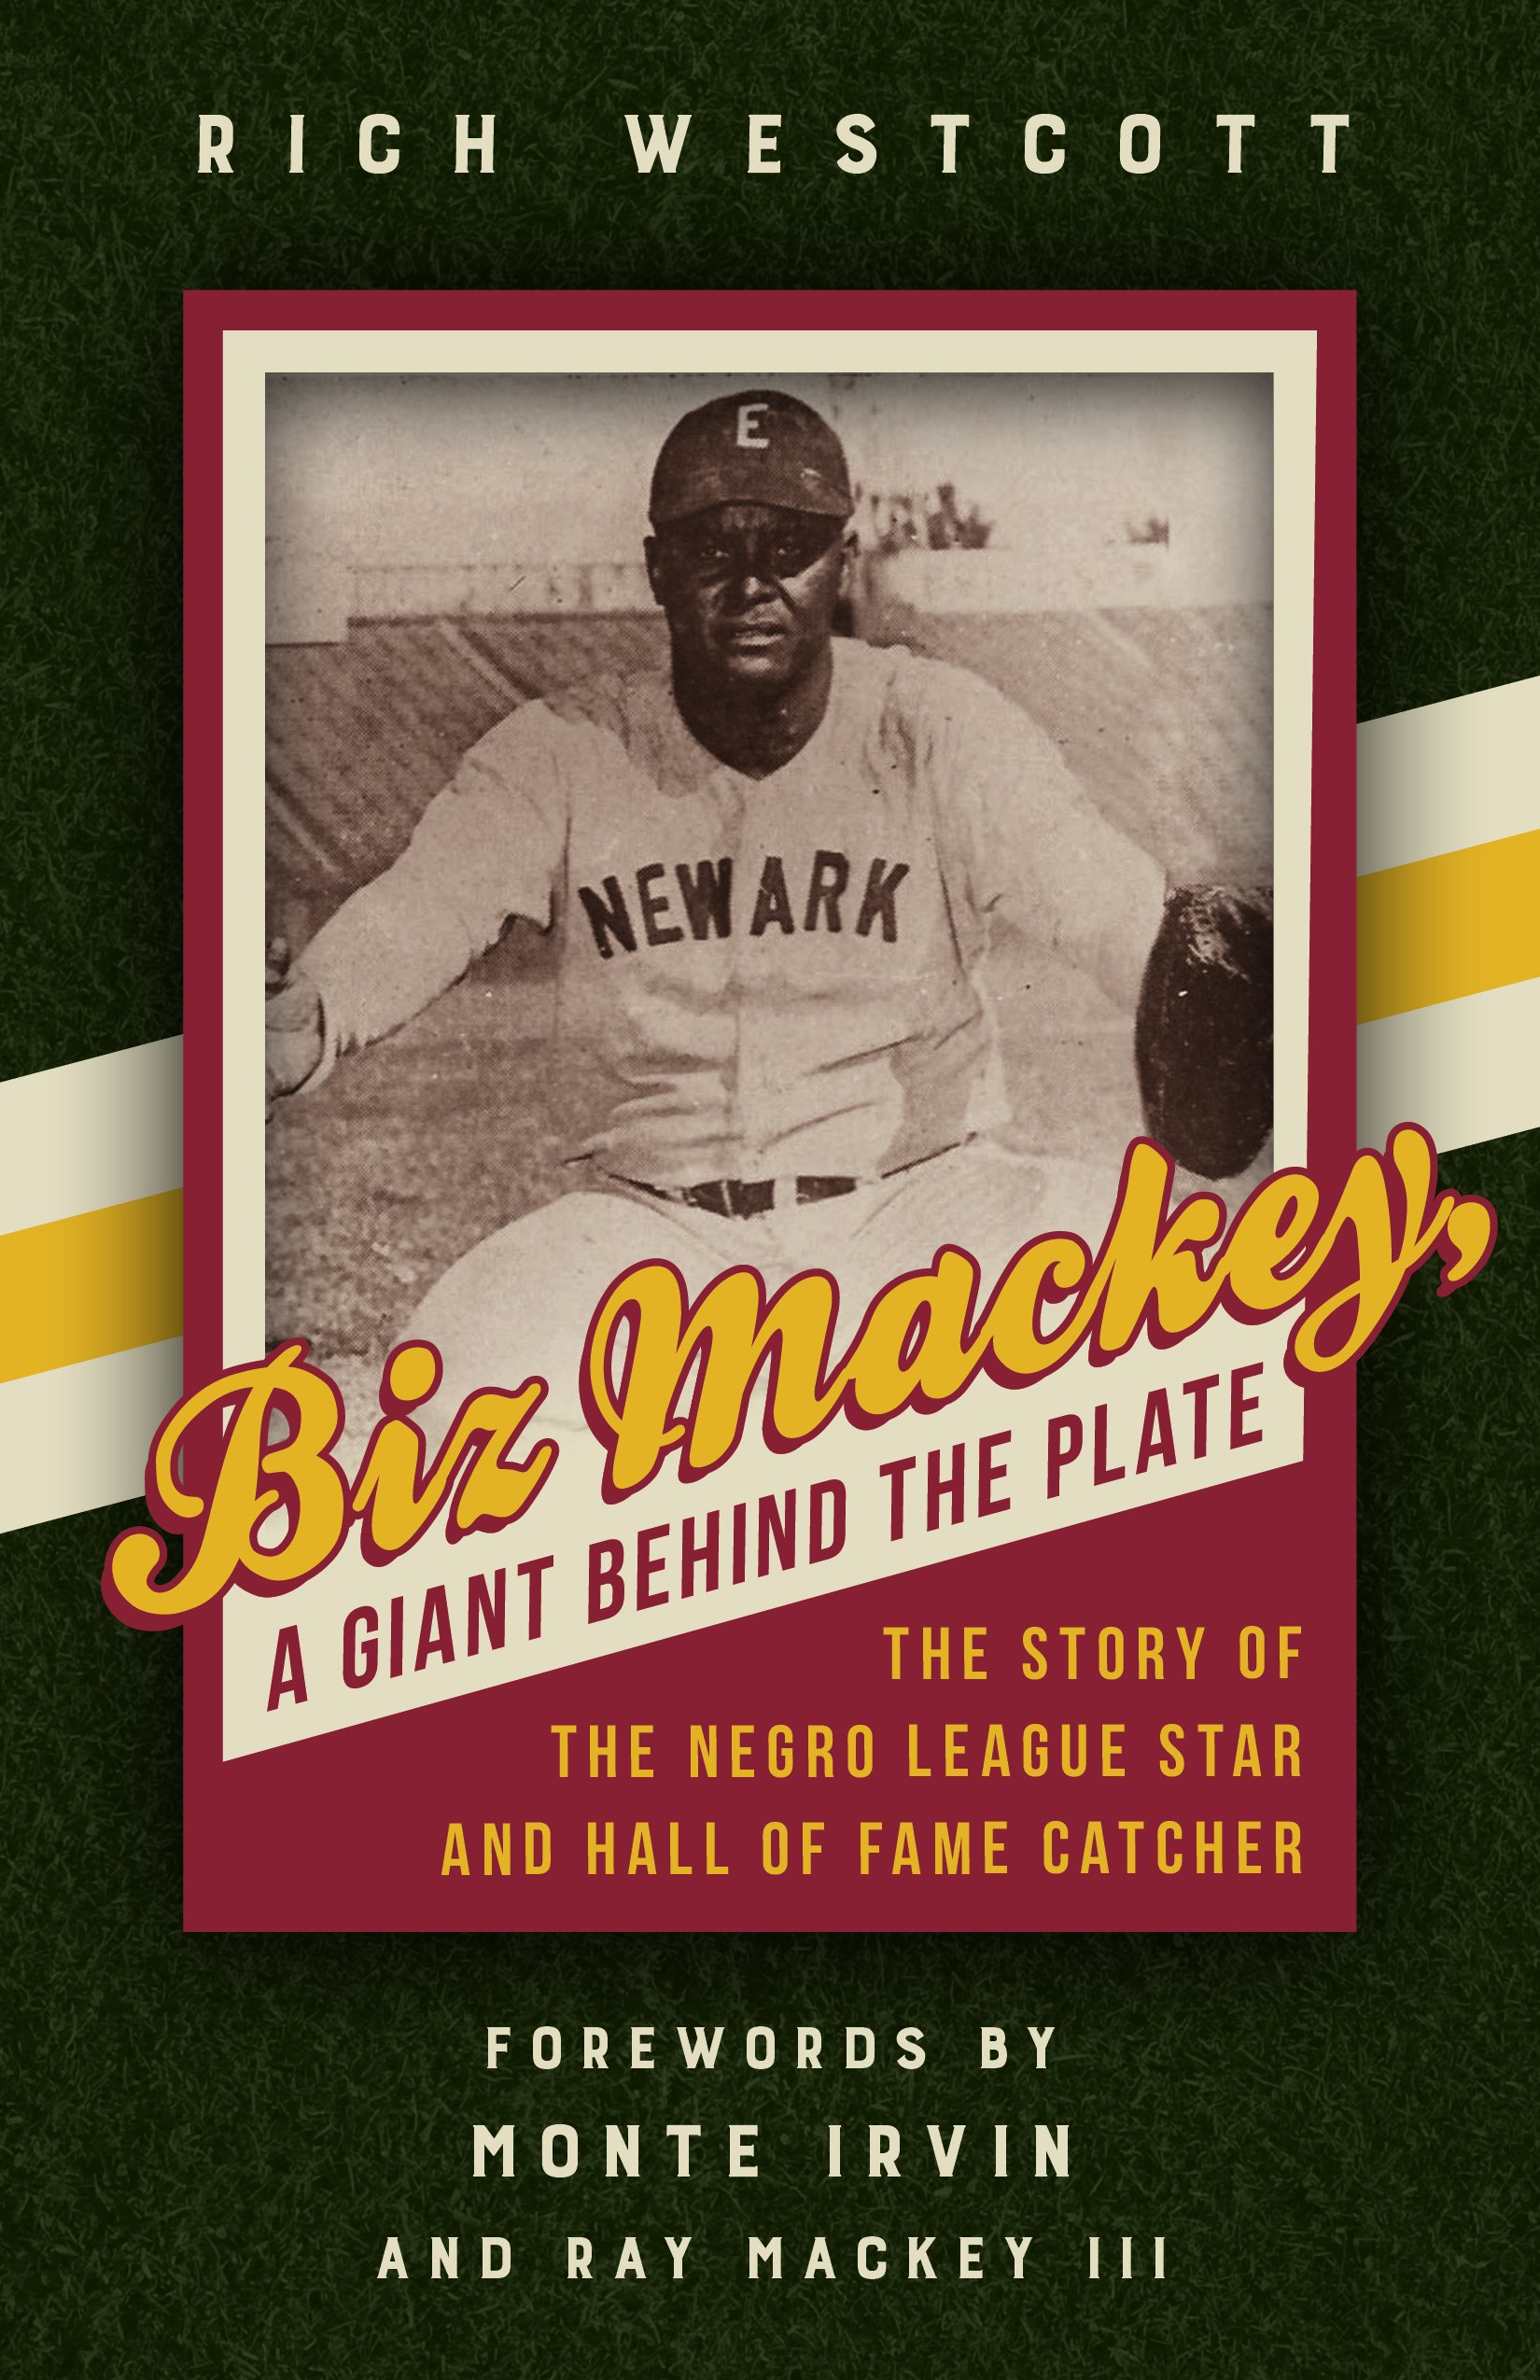 Biz Mackey, a giant behind the plate :  The Story of the Negro League Star And Hall of Fame Catcher